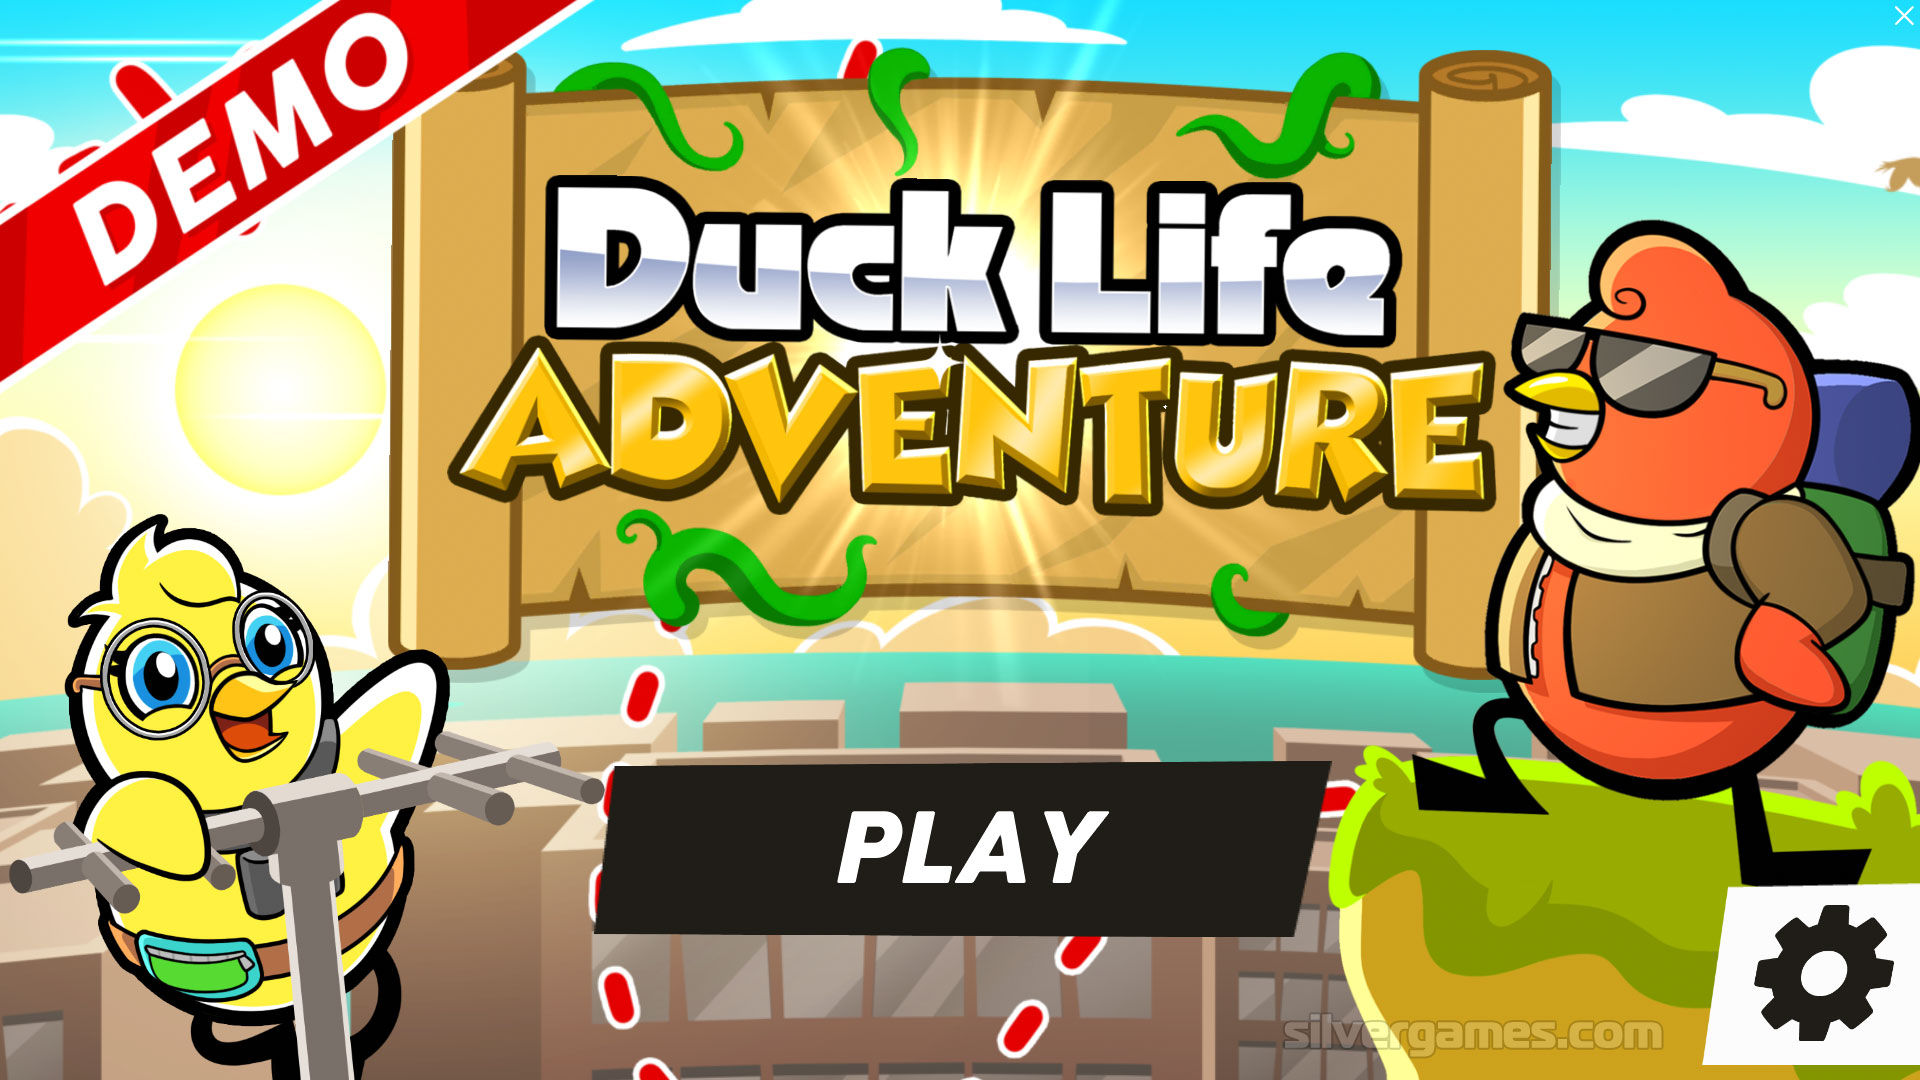 Duck Life: Adventure - Play Online on SilverGames 🕹